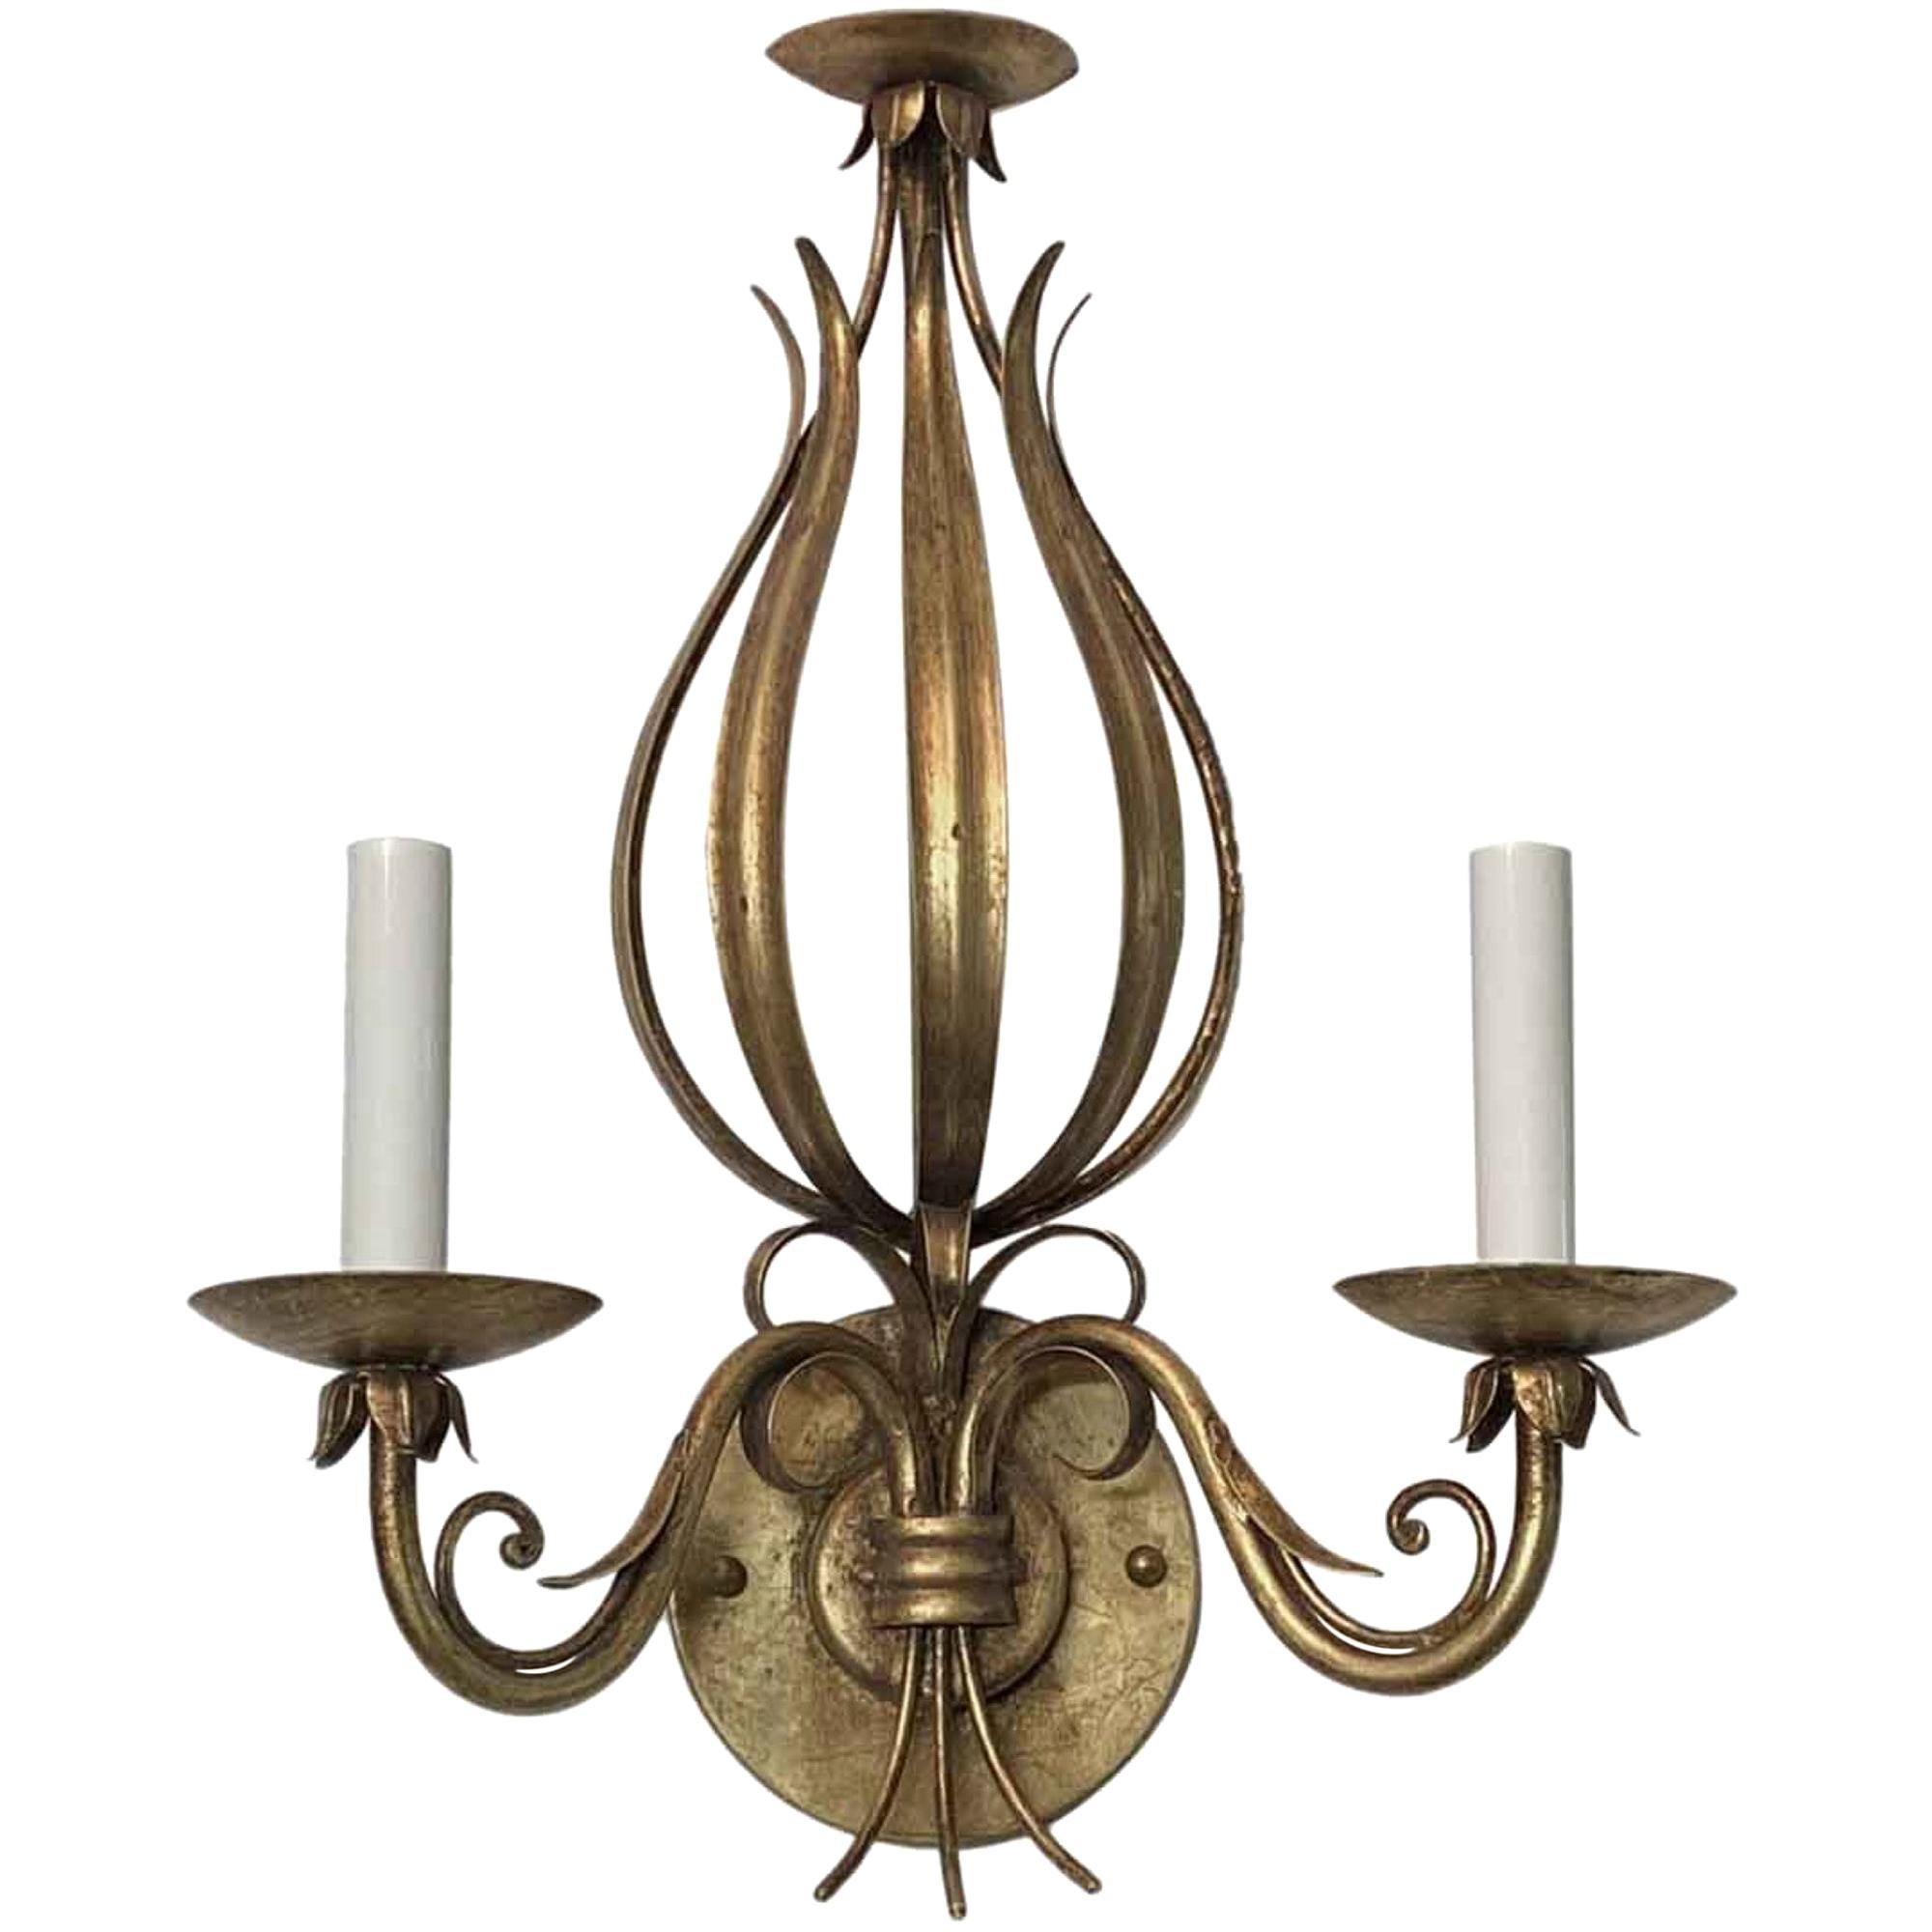 1990s Wrought Iron Foliage Gold Gilt Wall Sconce Done in a Florentine Style